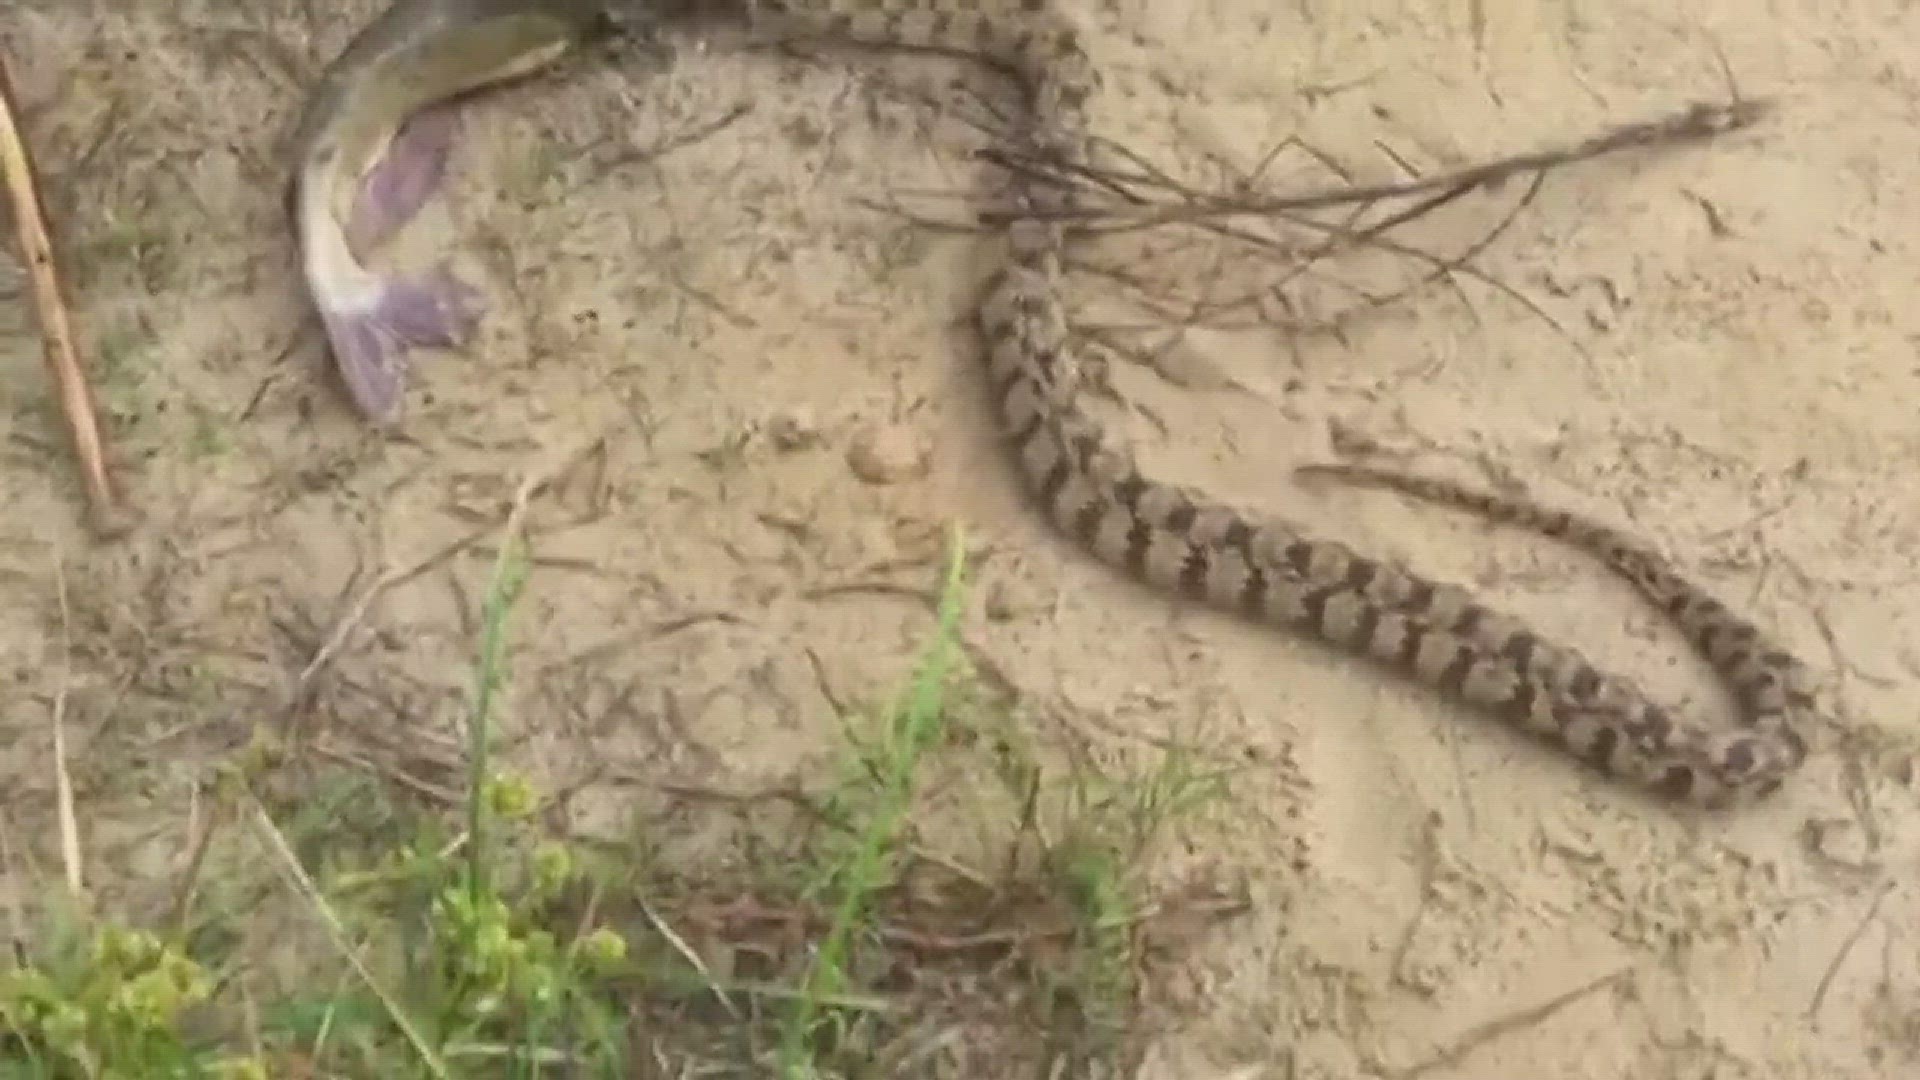 A KHOU 11 viewer shared video Monday of her 10-year-old son fighting with a snake over a fish!